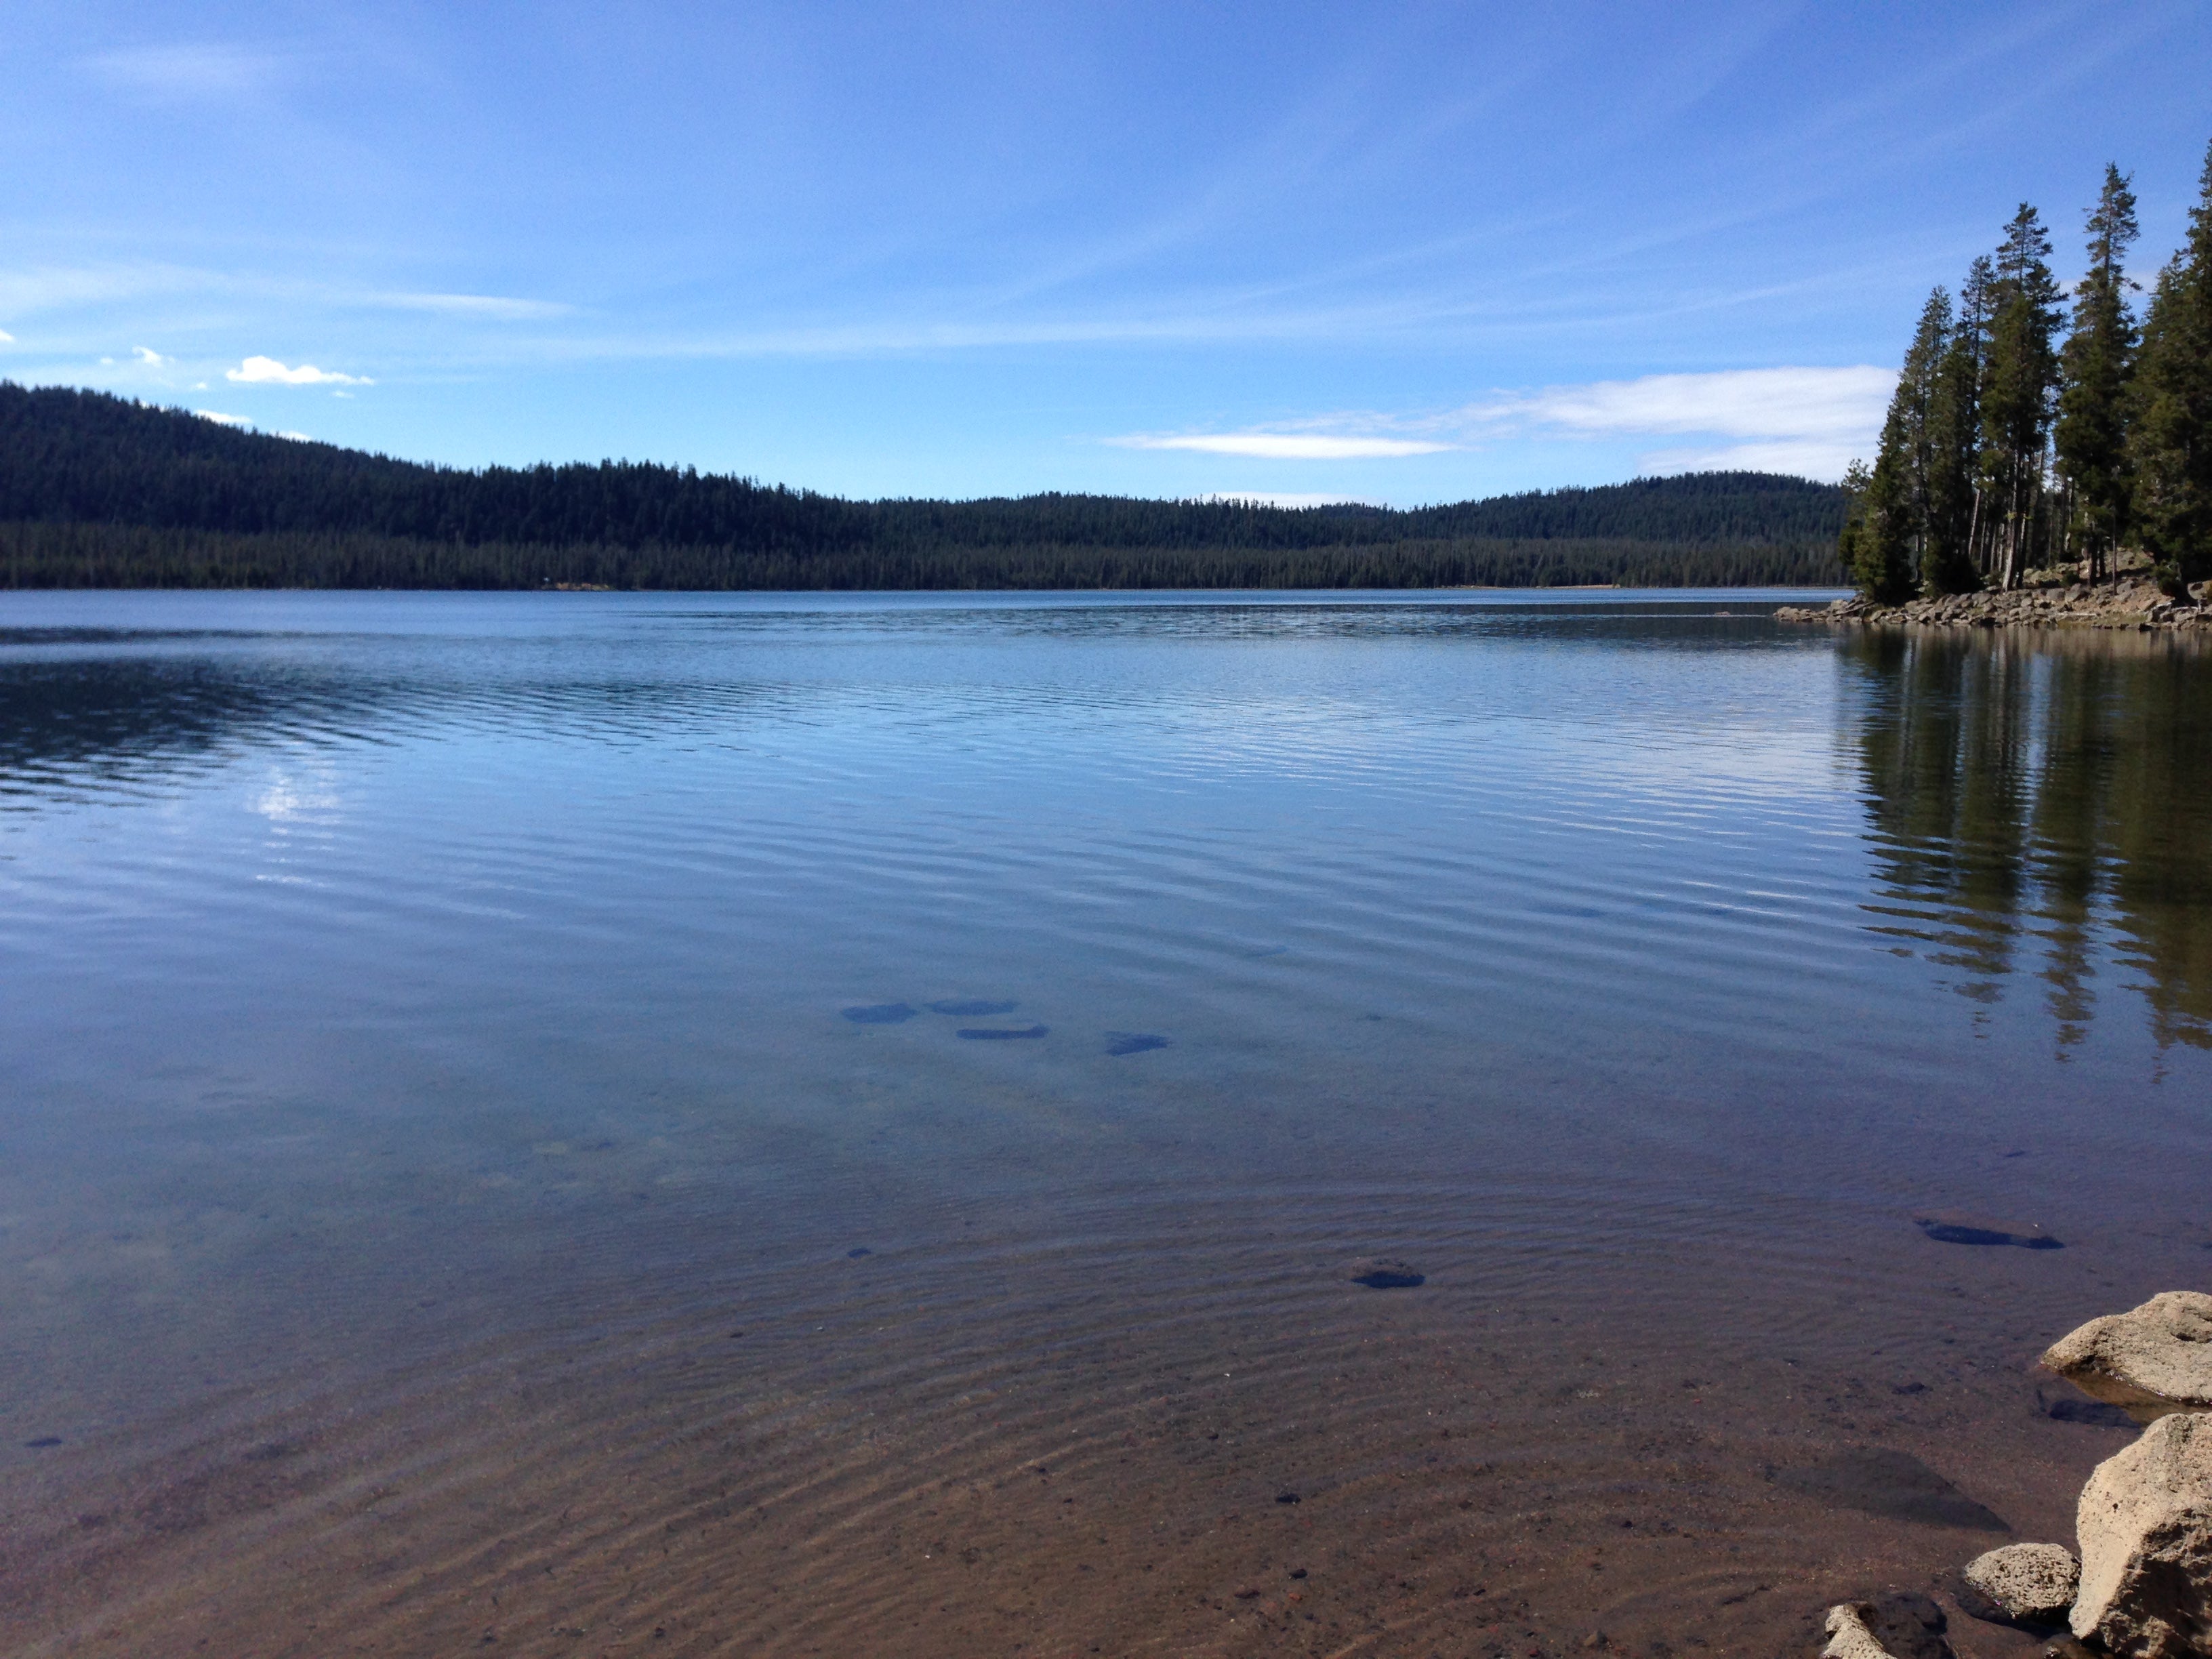 Camper submitted image from Medicine Lake Recreation Area - 4